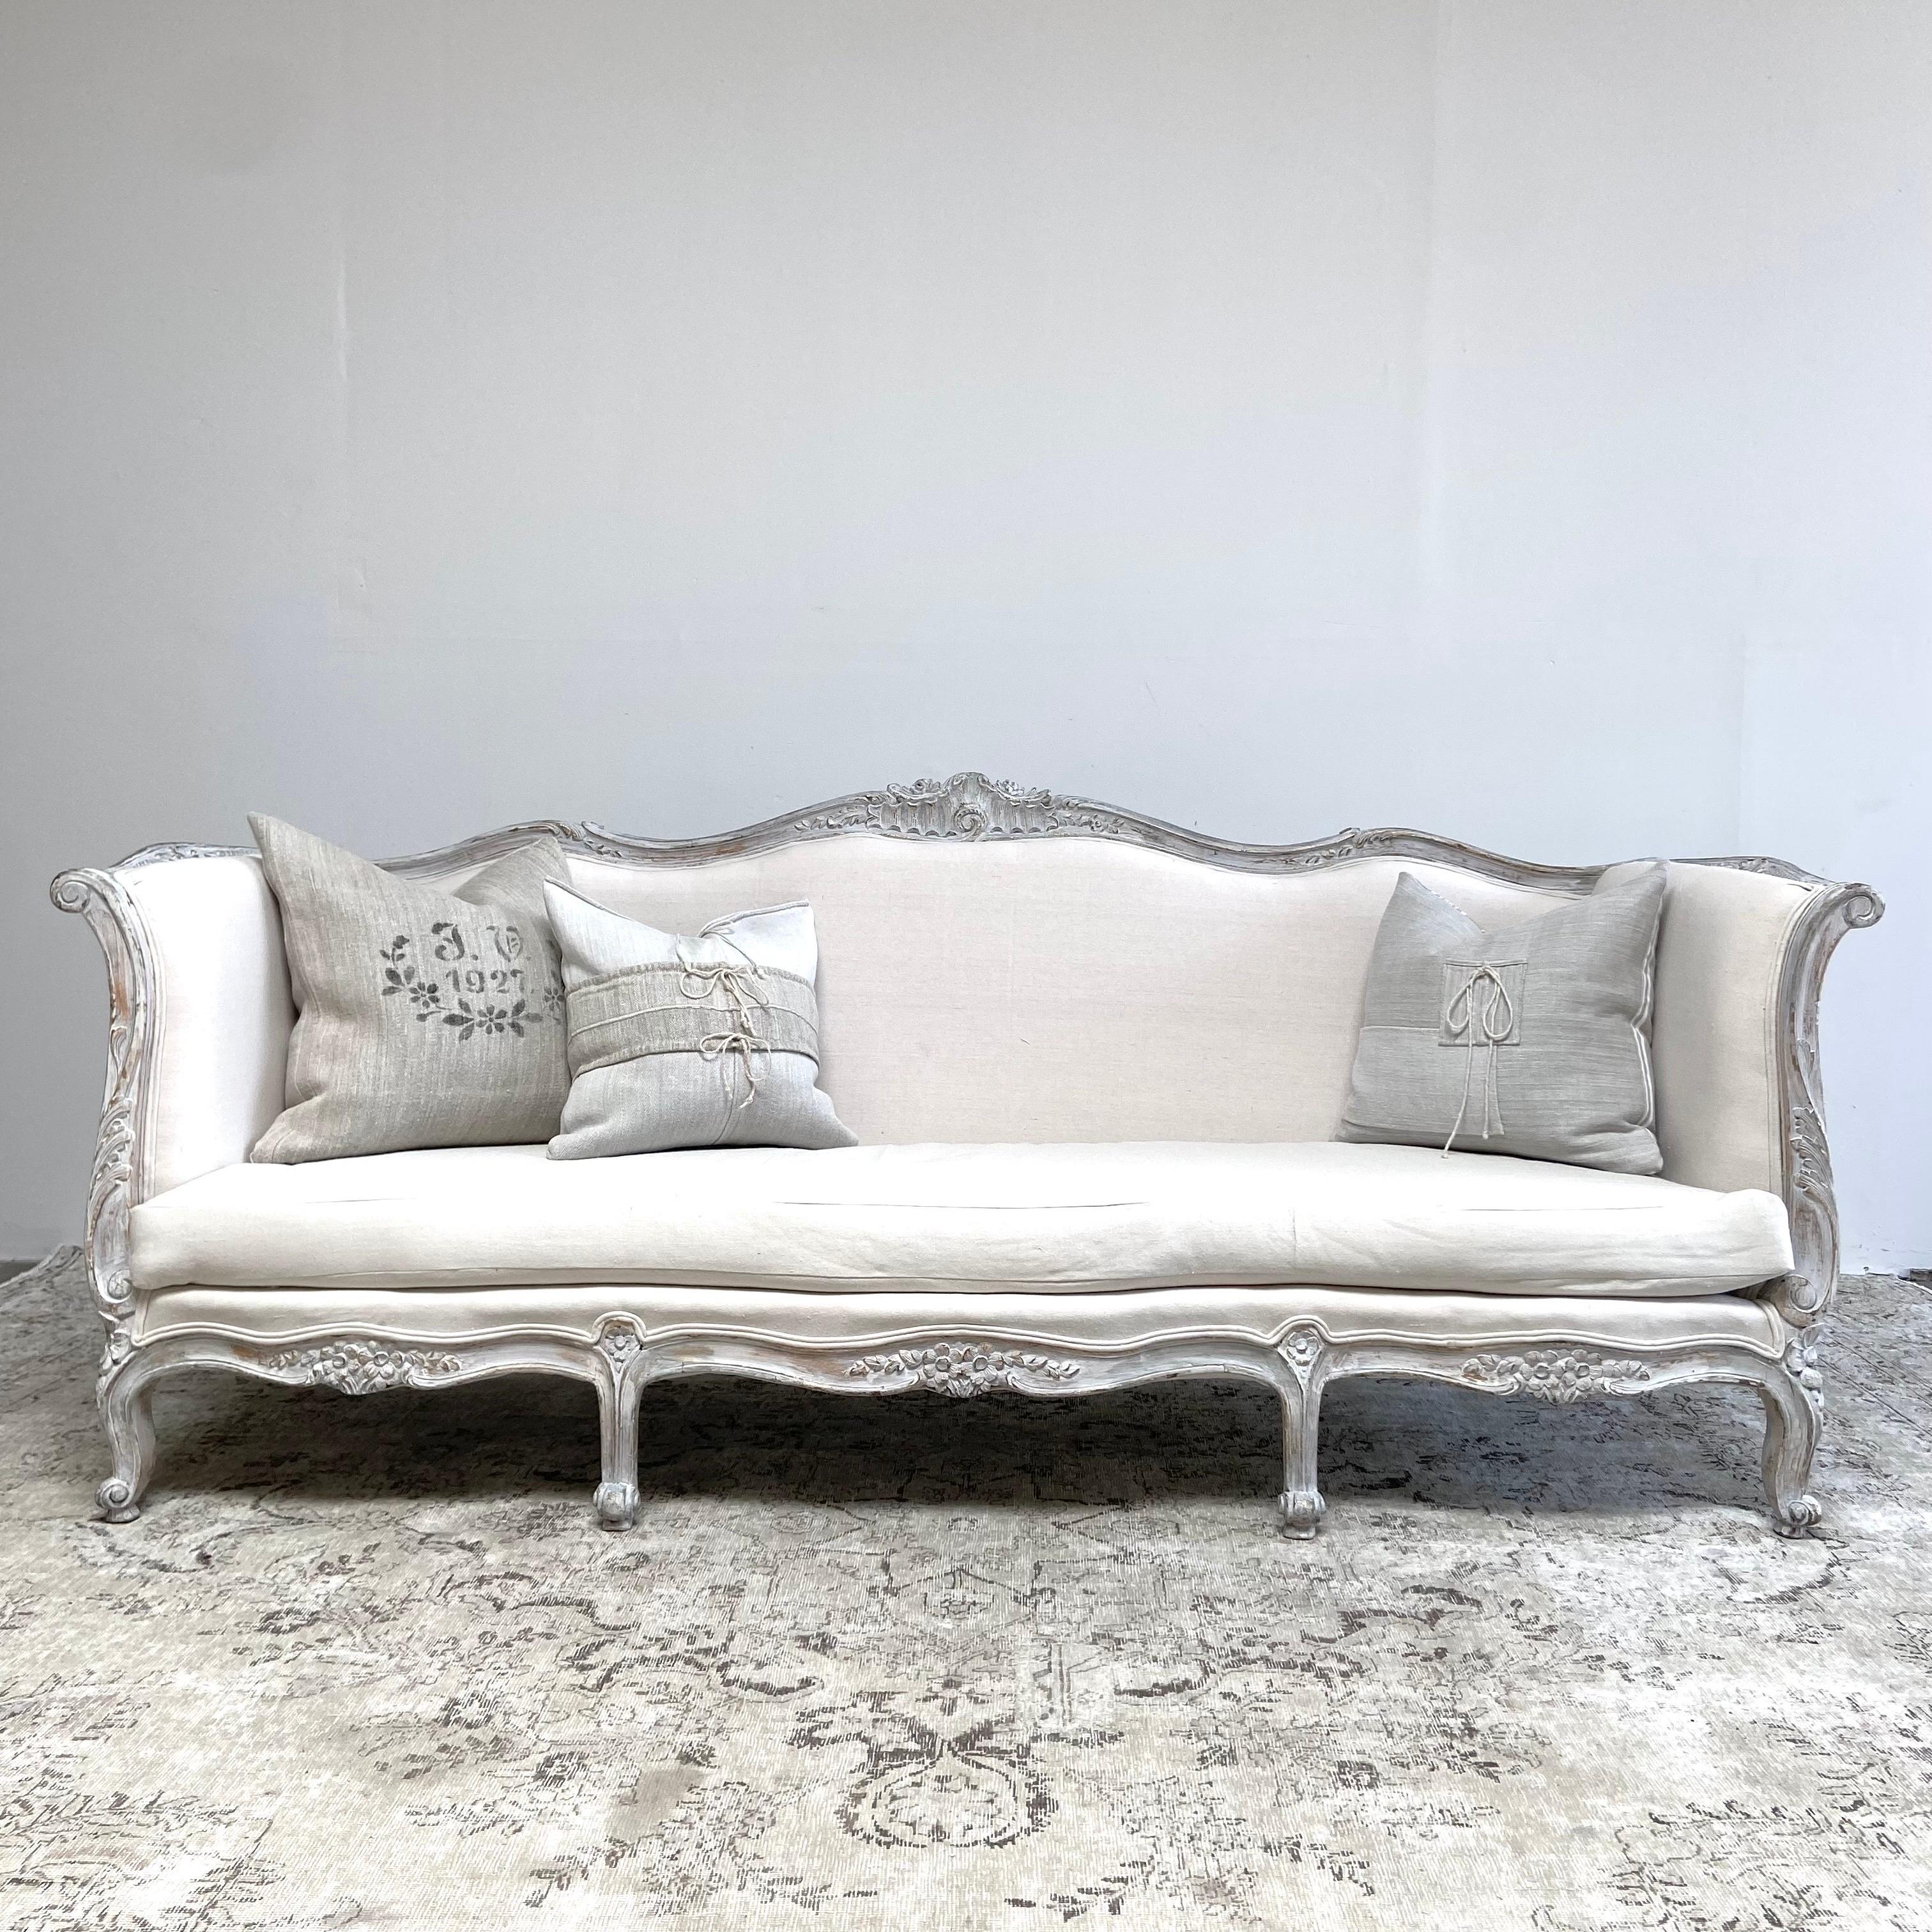 Vintage sofa 90”L x 30”D x 37”H
SH: 16”. SD:22”. AH:31”
This painted french style sofa is upholstered in a standard muslin, can be reupholstered in any of our linens, or your own material.
Frame is painted in a gustavian grey with subtle